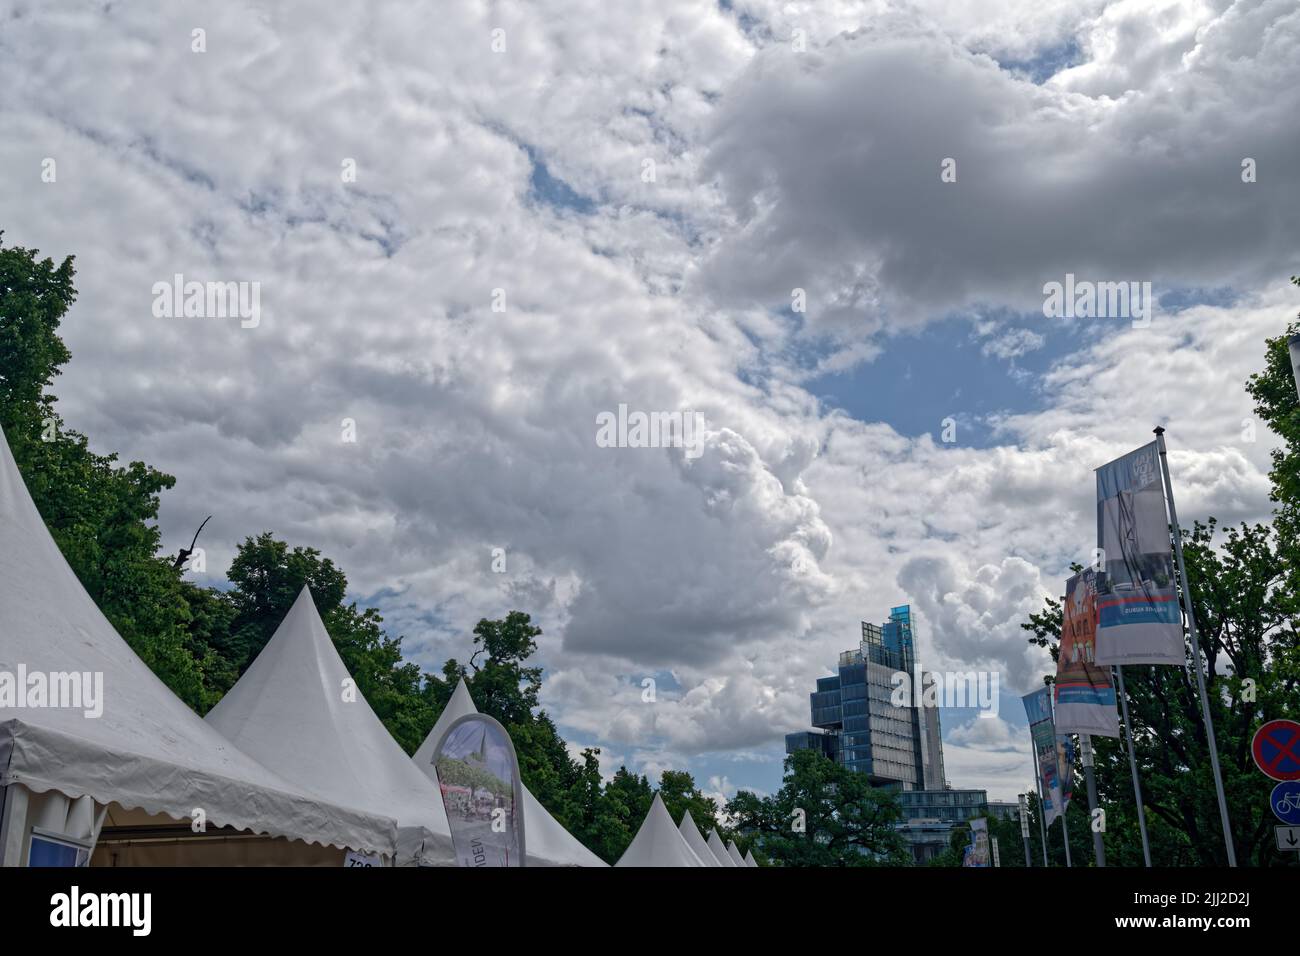 A high-rise office building under a thickly clouded sky in Hanover. Stock Photo